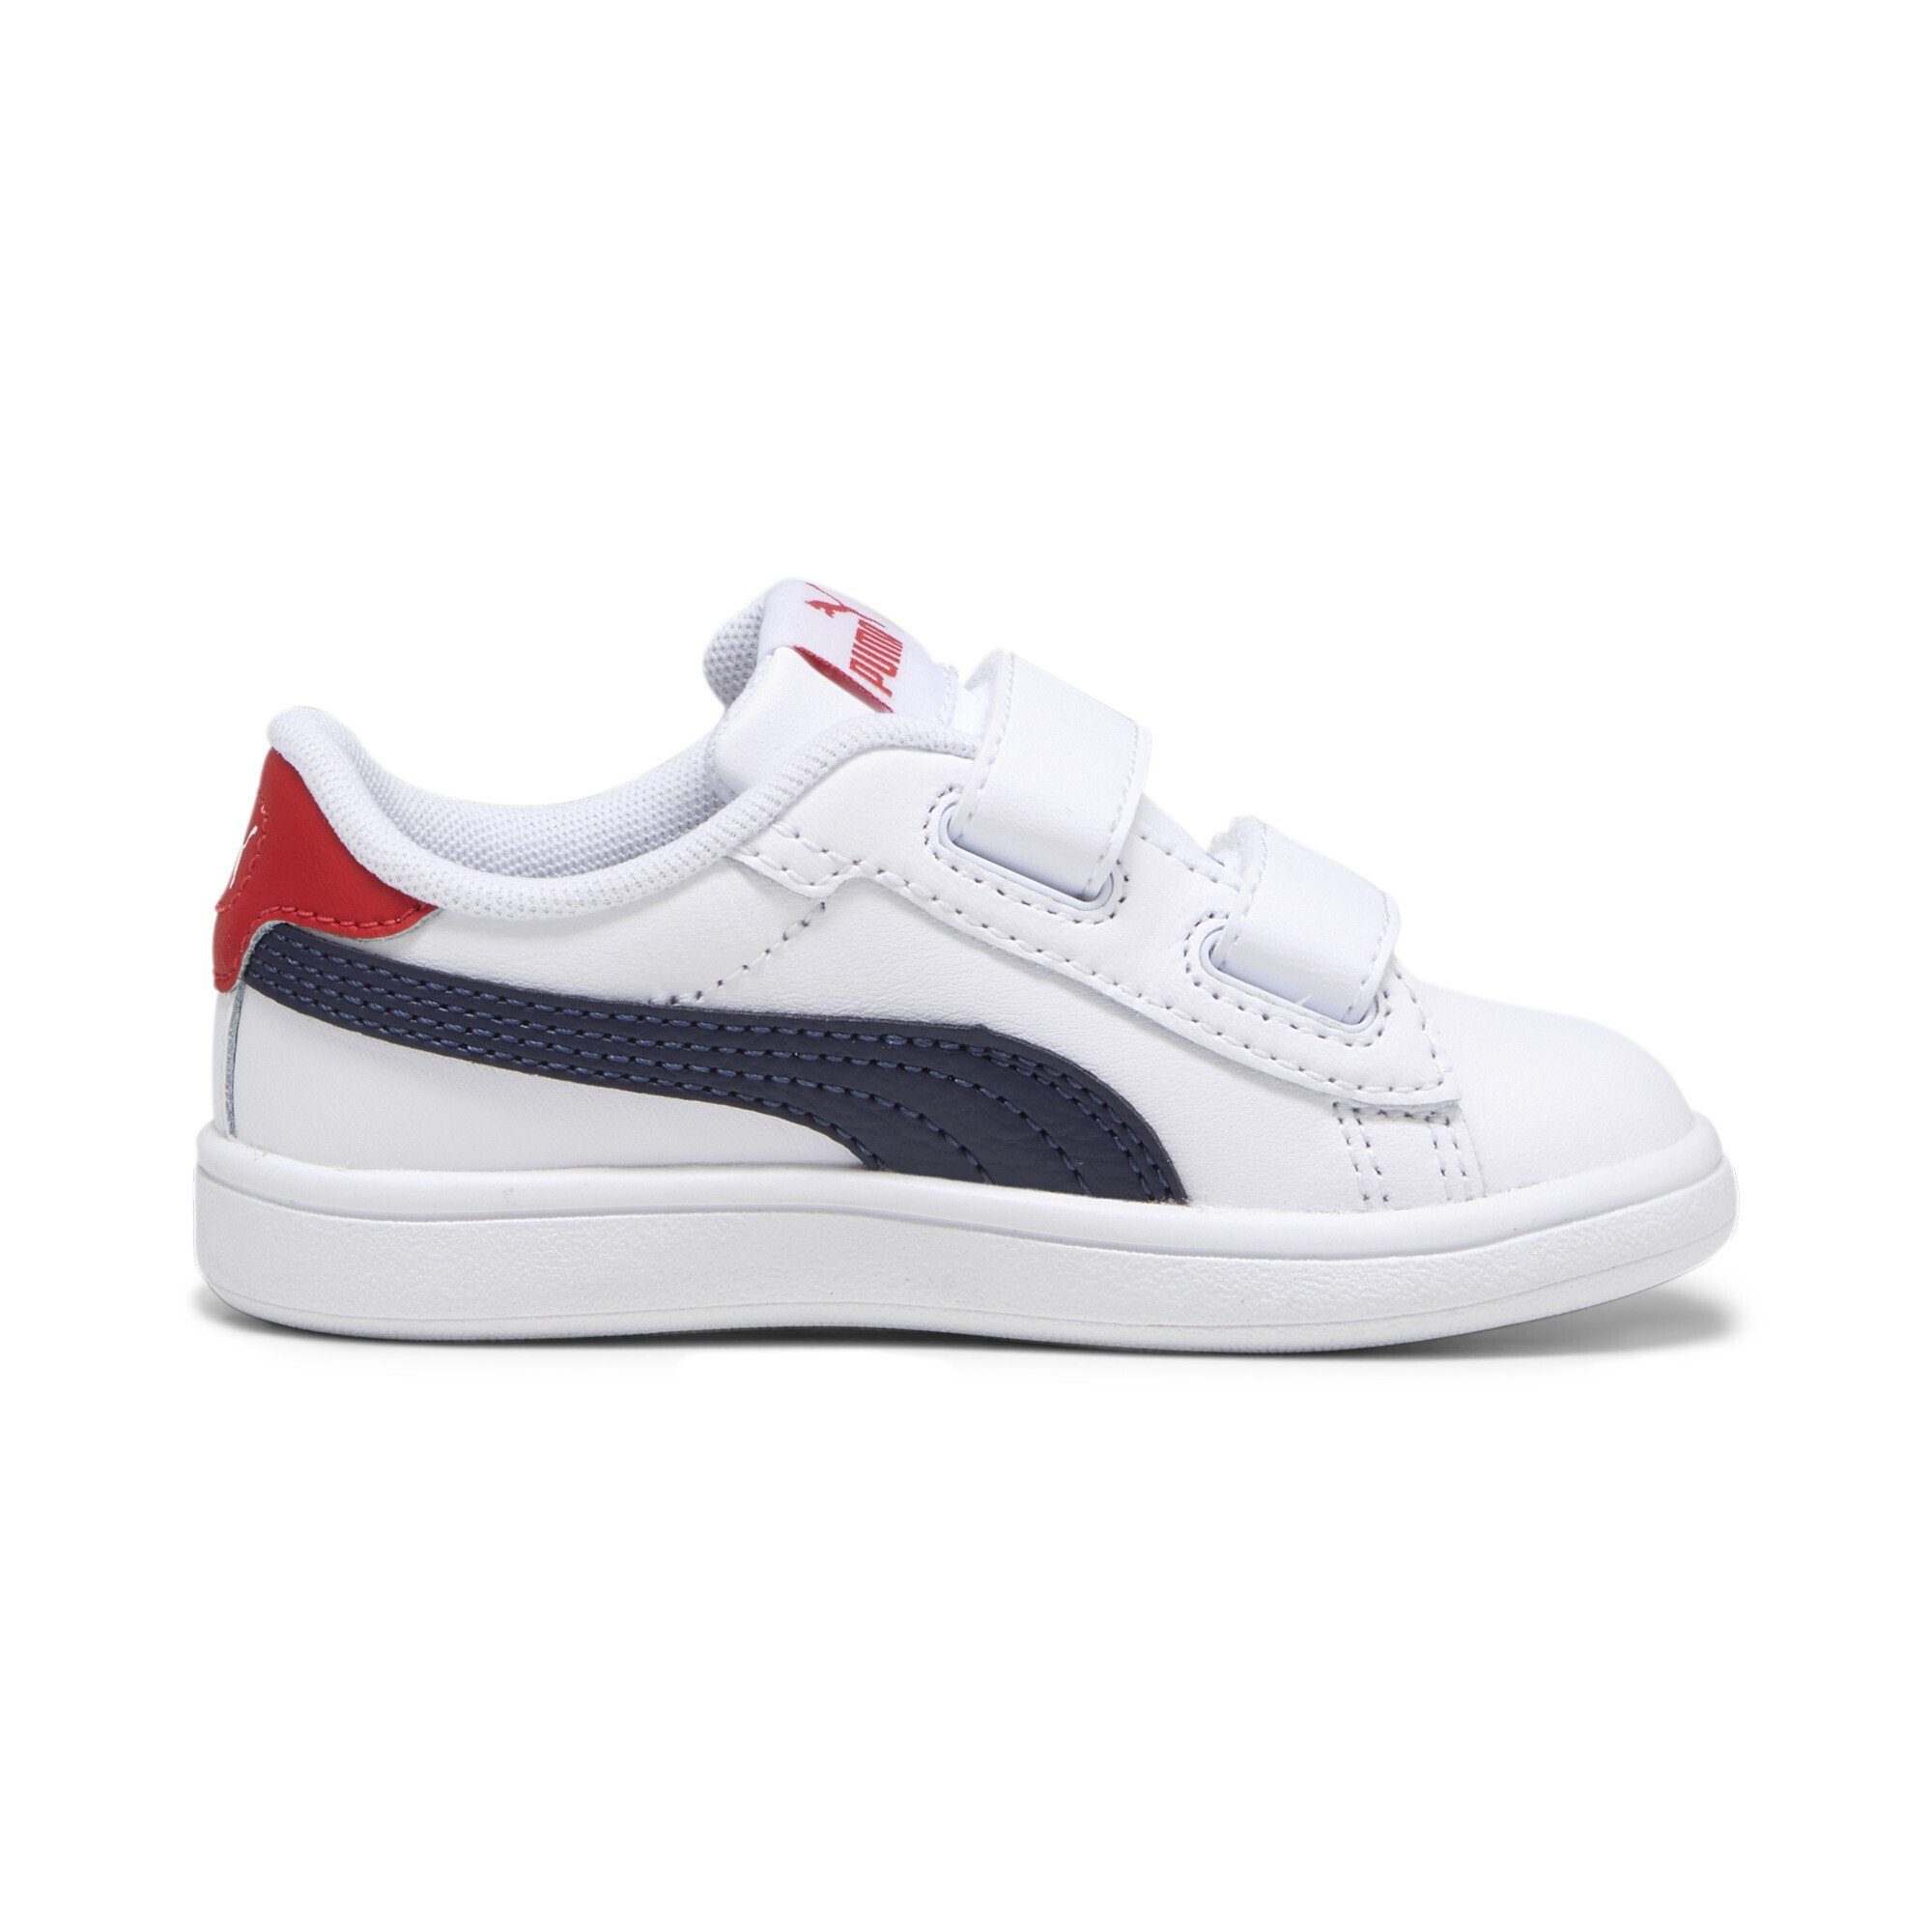 Sneakers V Smash Time Blue White 3.0 Red Sneaker PUMA Leather Kinder All For Navy